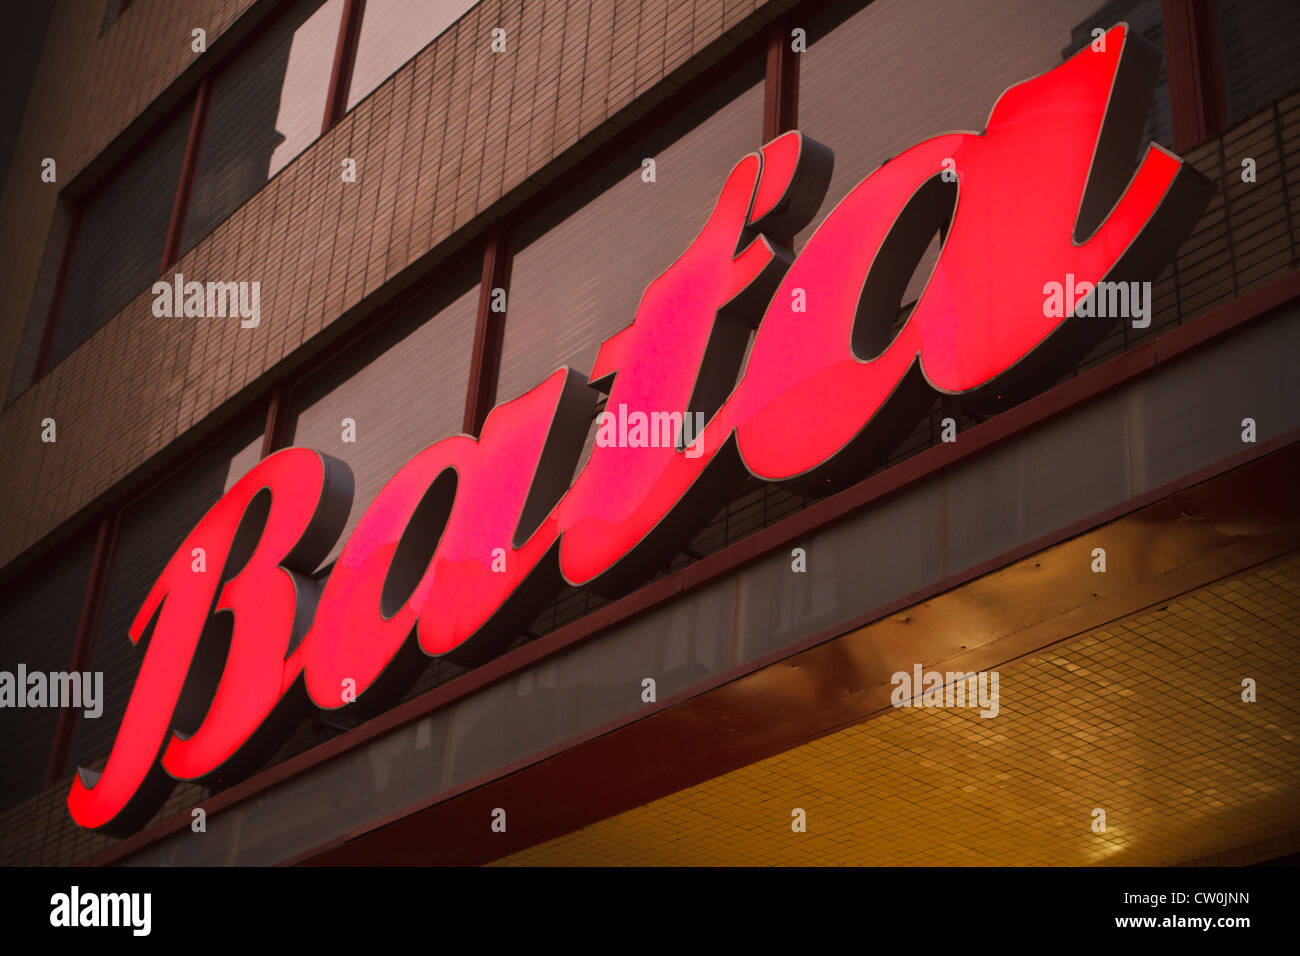 Bata Czech High Resolution Stock Photography and Images - Alamy